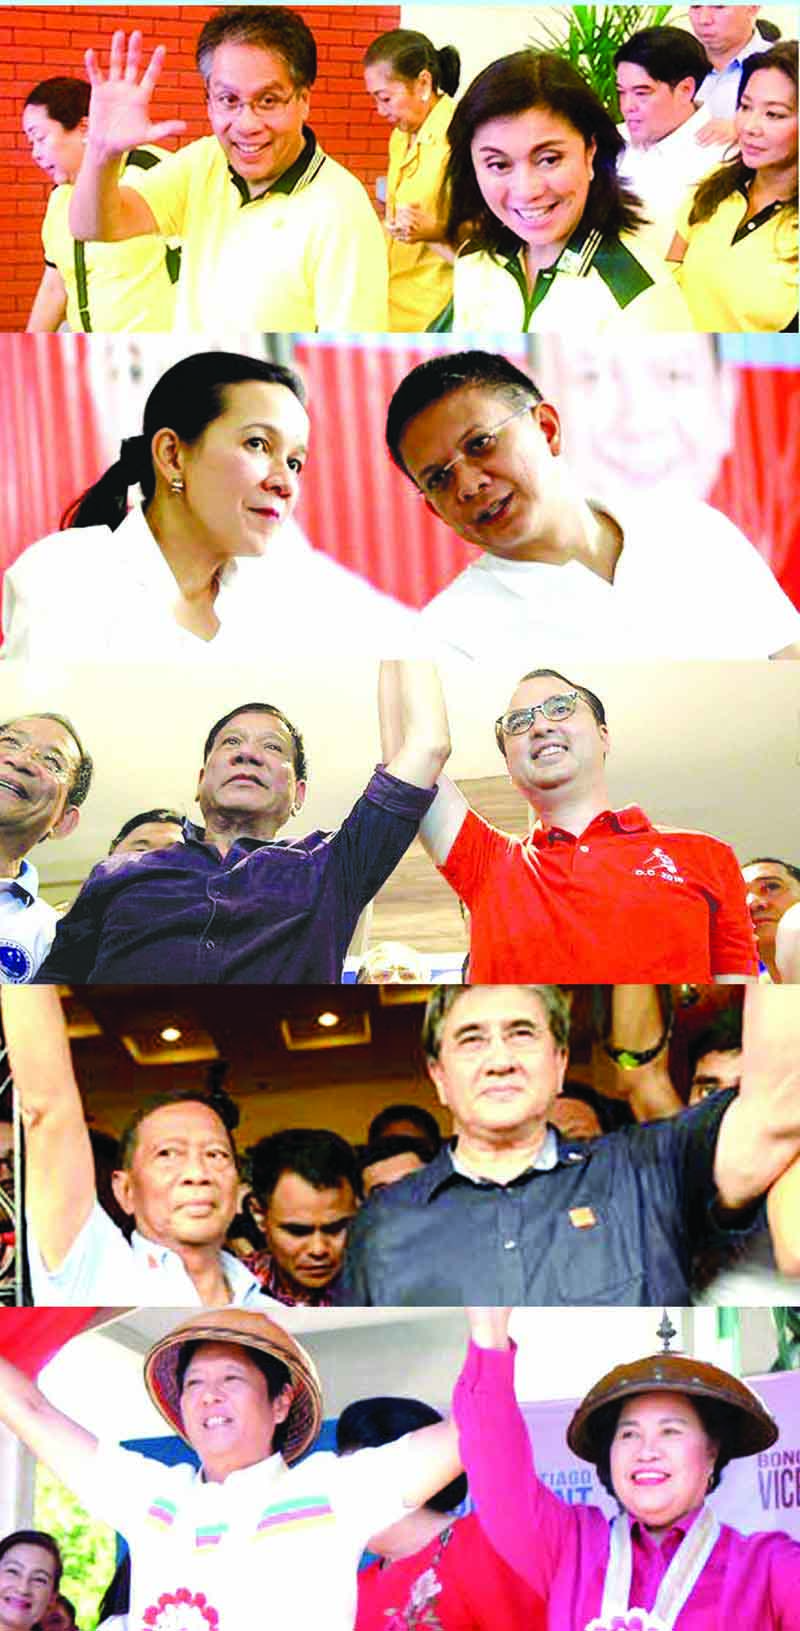 AND THE SHOW BEGINS. Impressive and colorful campaign launching held yesterday among the top five presidential bets, (clockwise) Mar Roxas and Leni Robredo in Capiz, Grace Poe and Chiz Escudero at Plaza Miranda, Rodrigo Duterte and Allan Peter Cayetano in Tondo, Manila, Jejomar Binay and Gringo Honasan in Mandaluyong City, Miriam Santiago and Bongbong Marcos in Batac, Ilocus.